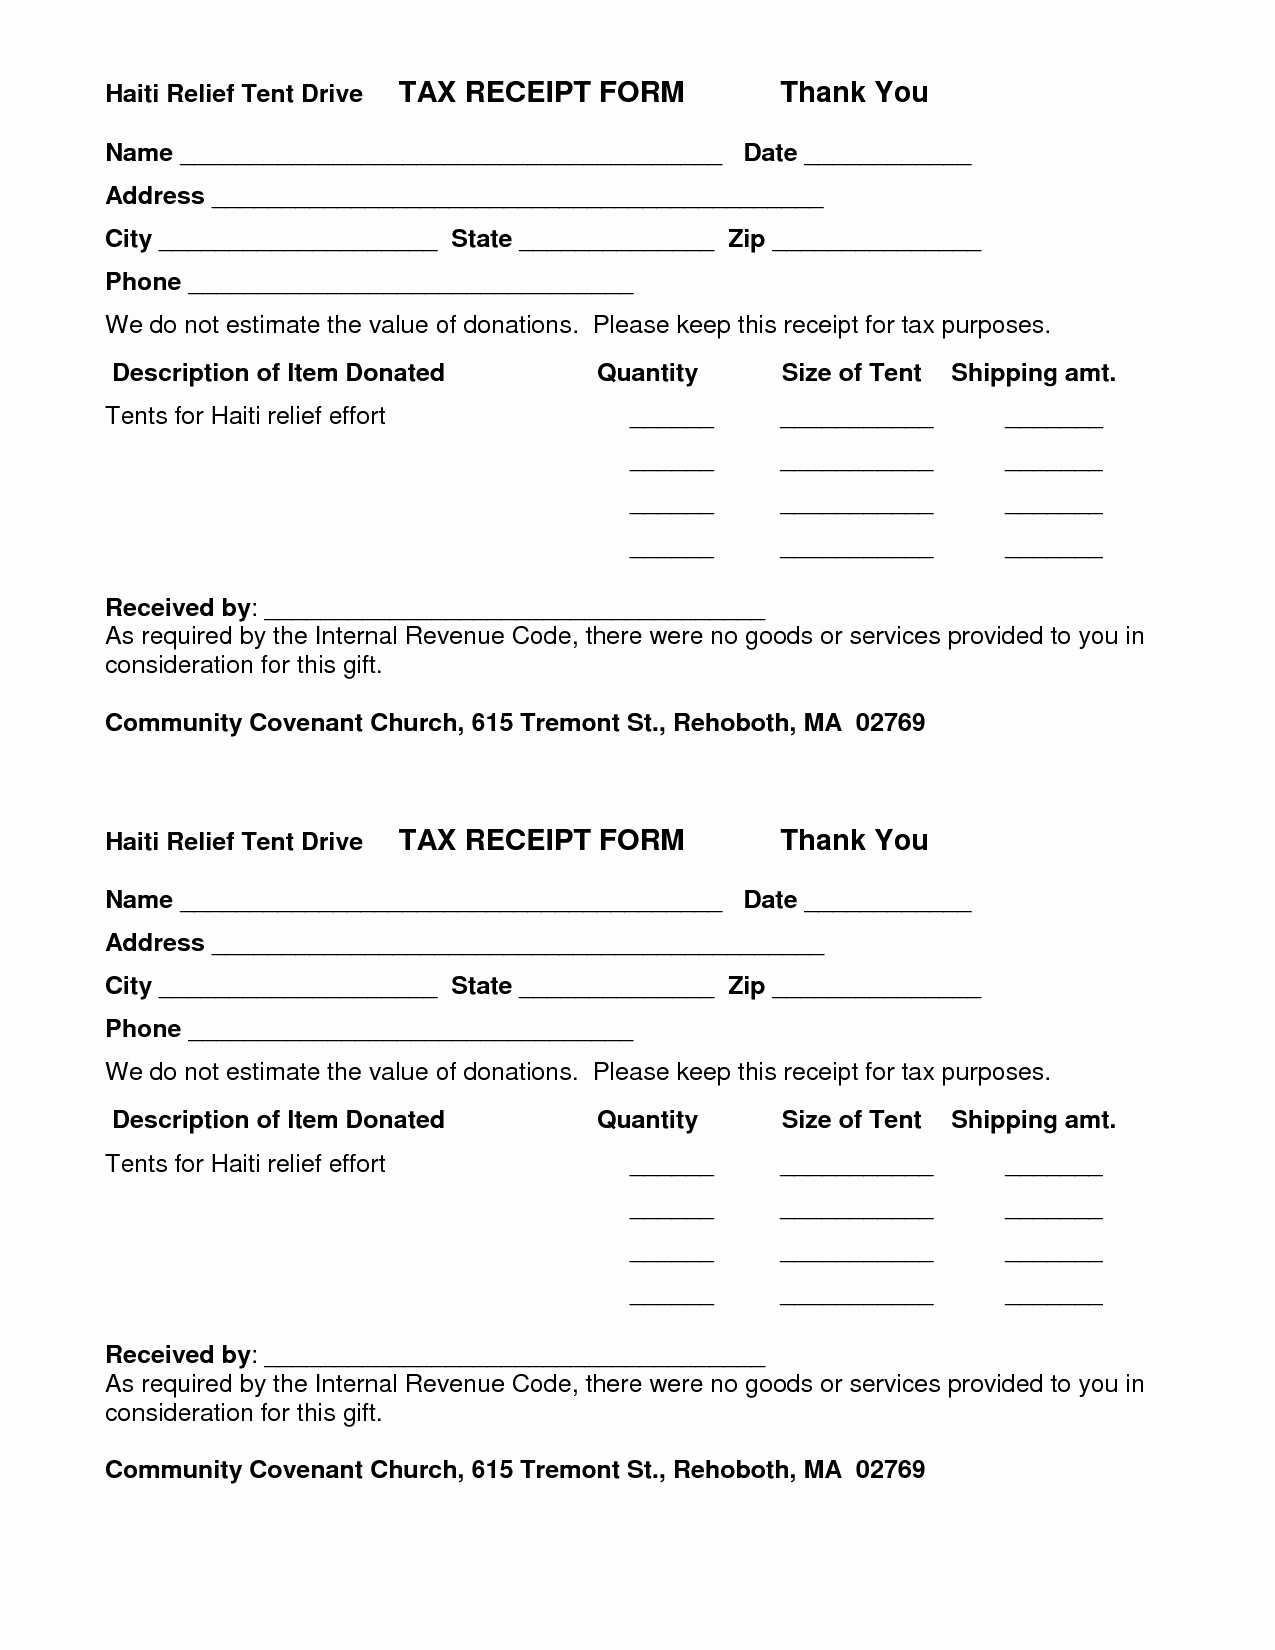 Donation form for Tax Purposes New Lovely Donation Receipt Letter for Tax Purposes